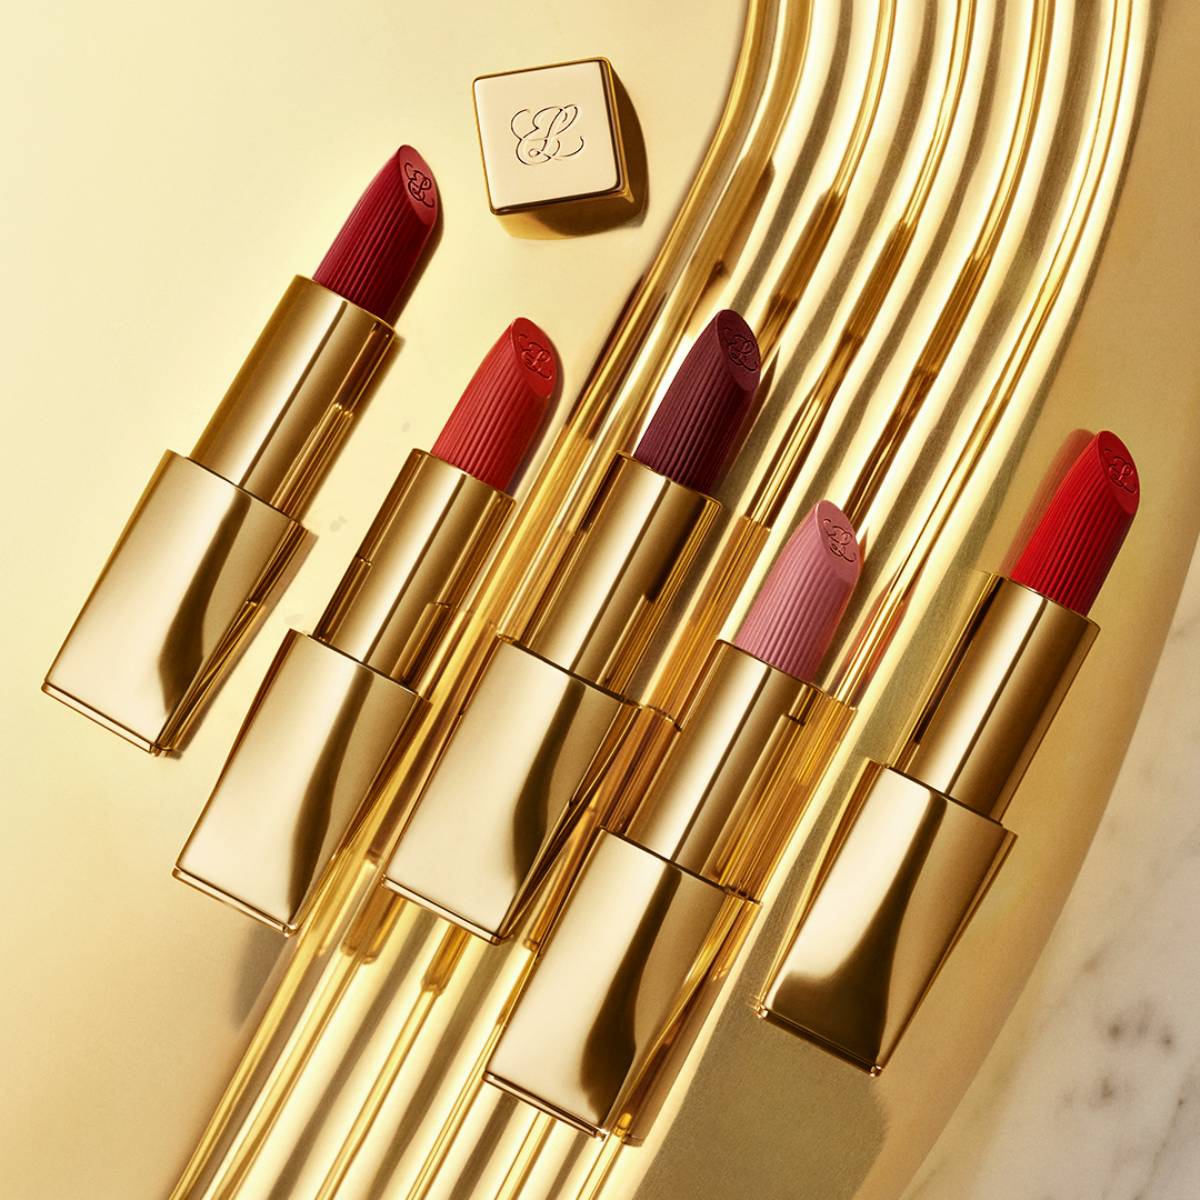 Lip Products We're Copping This National Lipstick Day